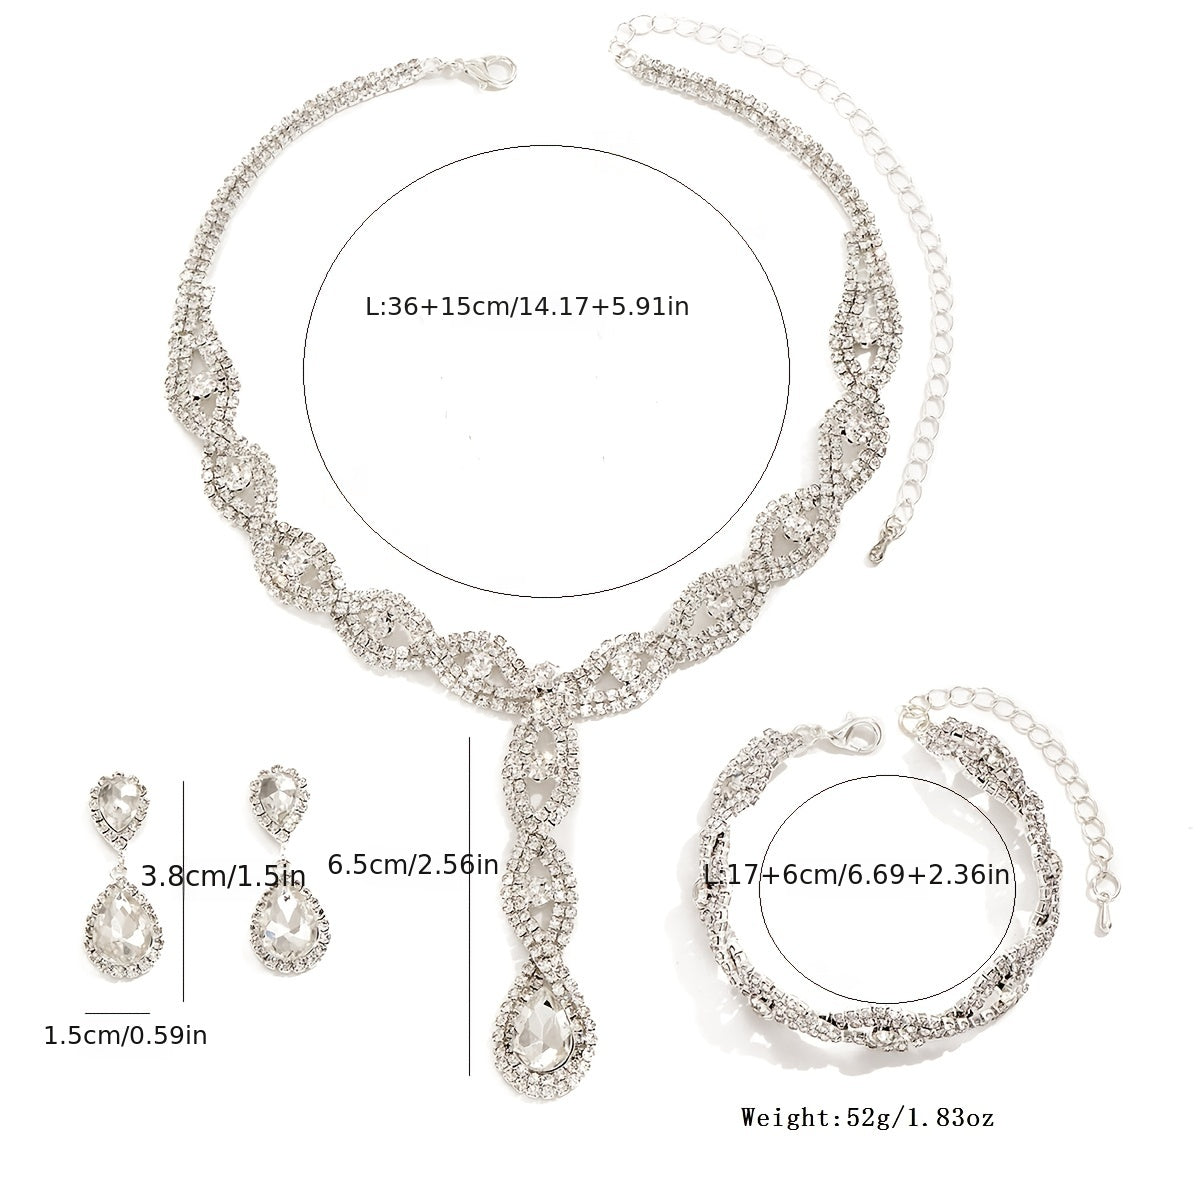 3pcs Elegant Zircon Jewelry Set - Silver Plated Necklace, Earrings, and Bracelet for Weddings, Engagements, and Birthdays - Perfect Gift for Women and Girls